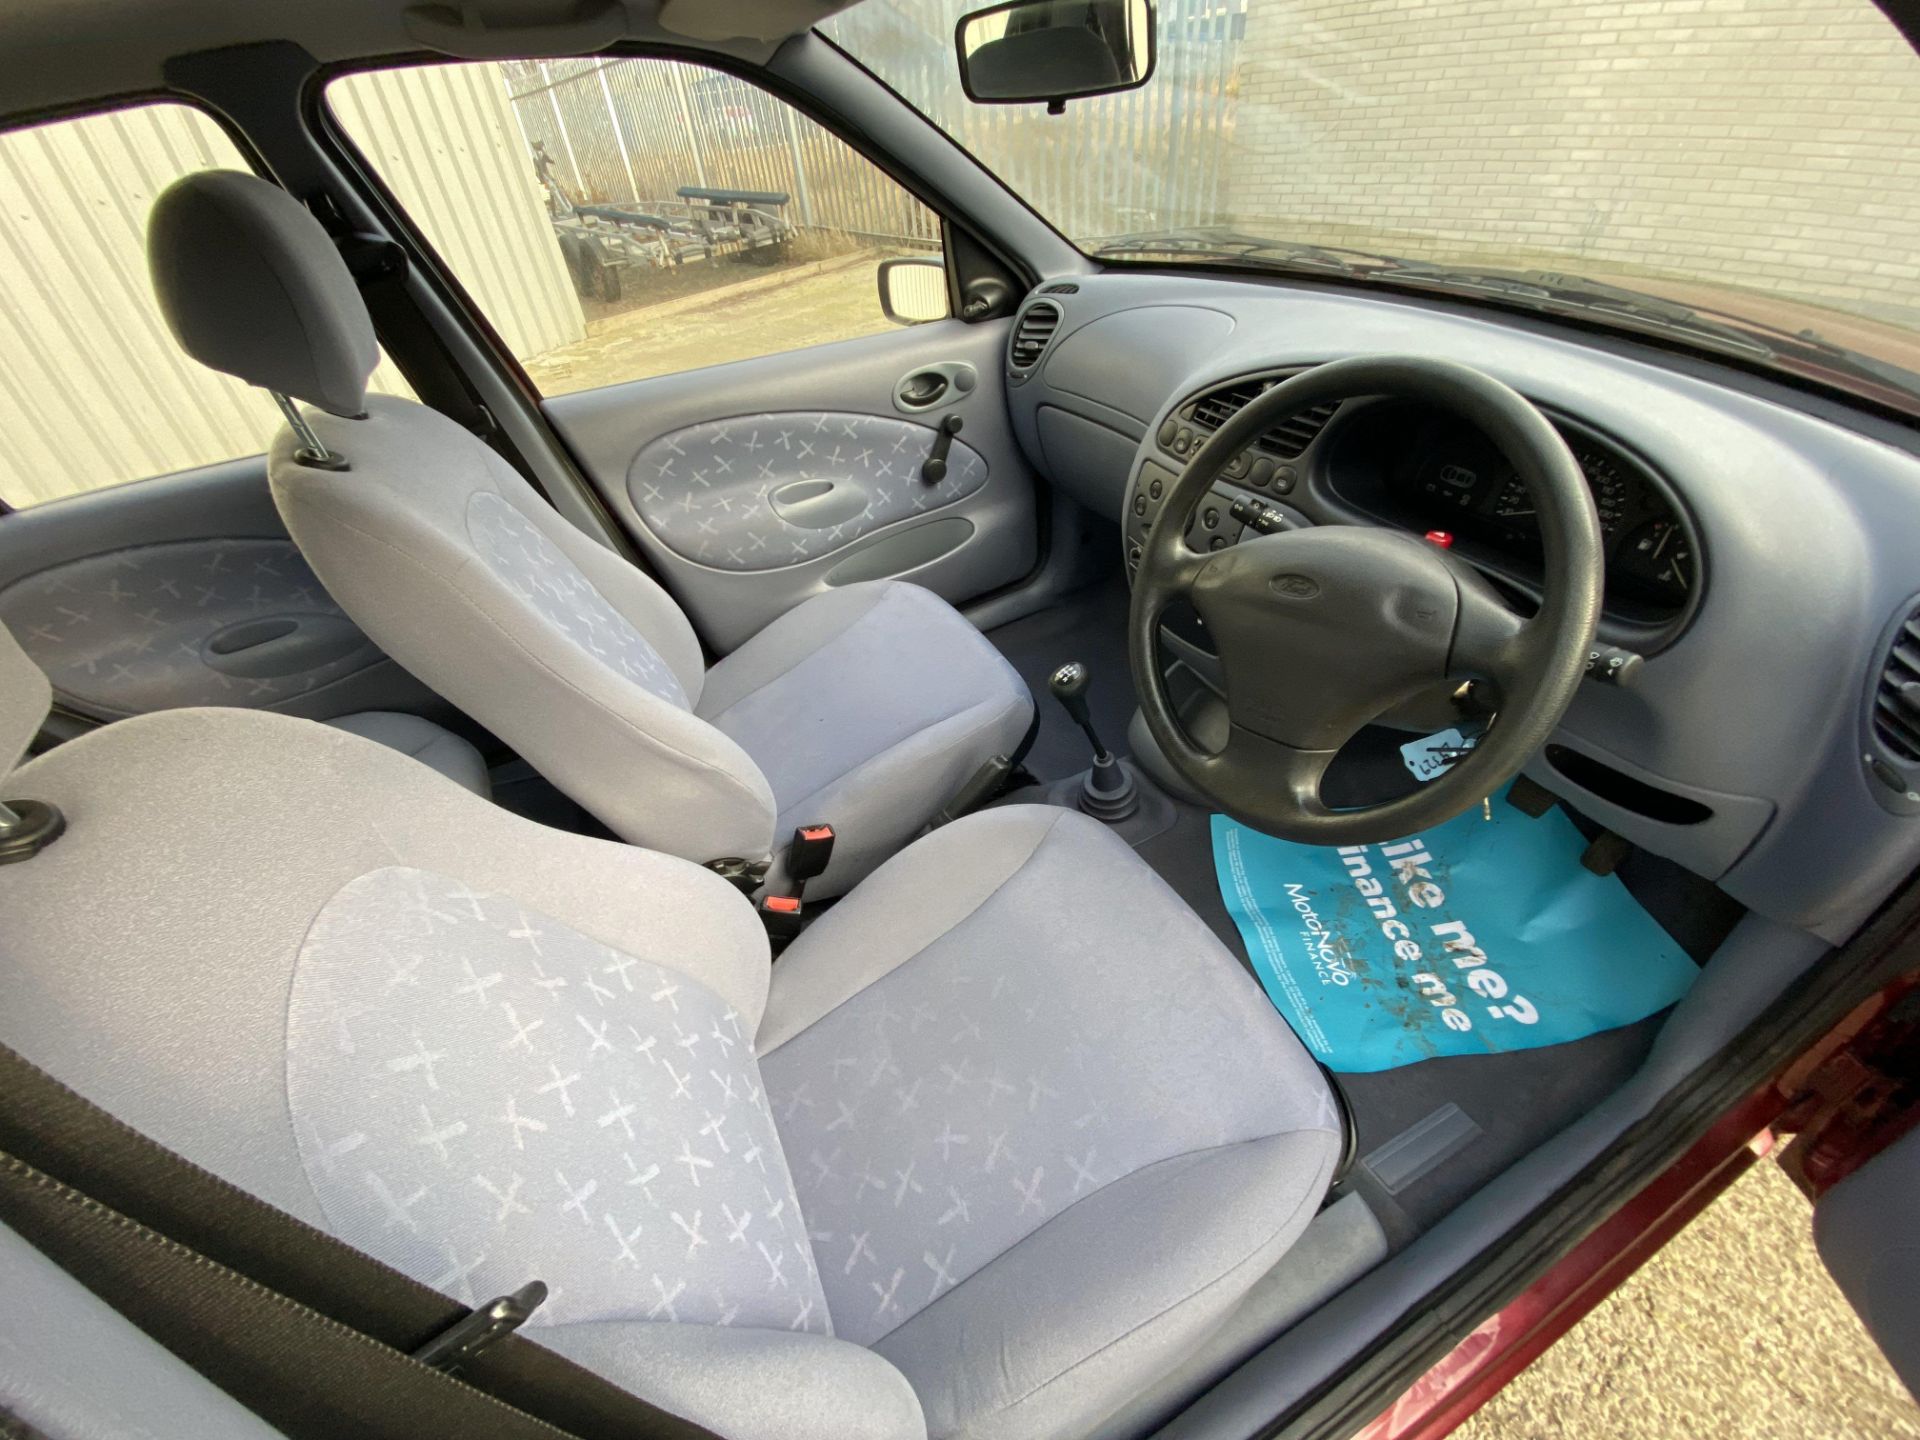 Ford Fiesta - Image 18 of 25